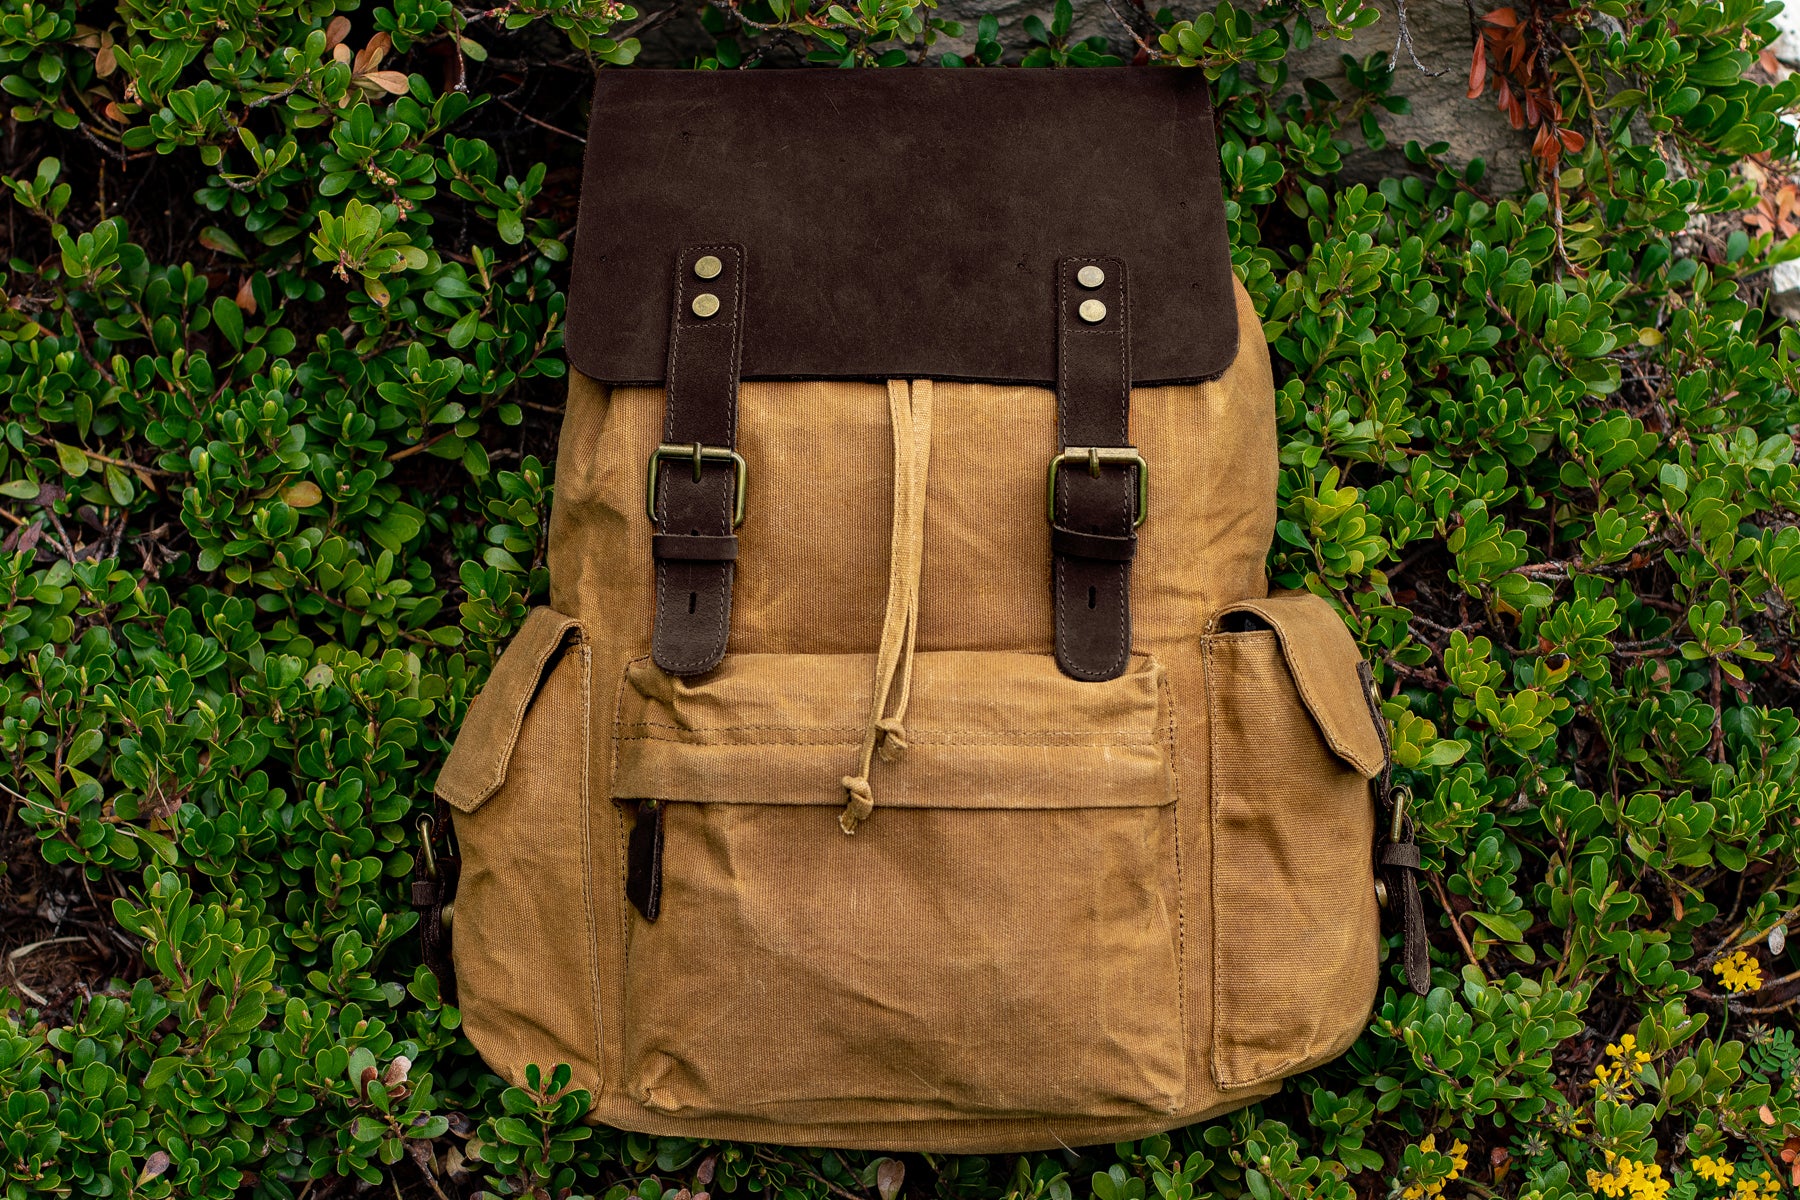 quality leather and waxed canvas backpack in khaki colors sitting on a field of wild grass outdoor